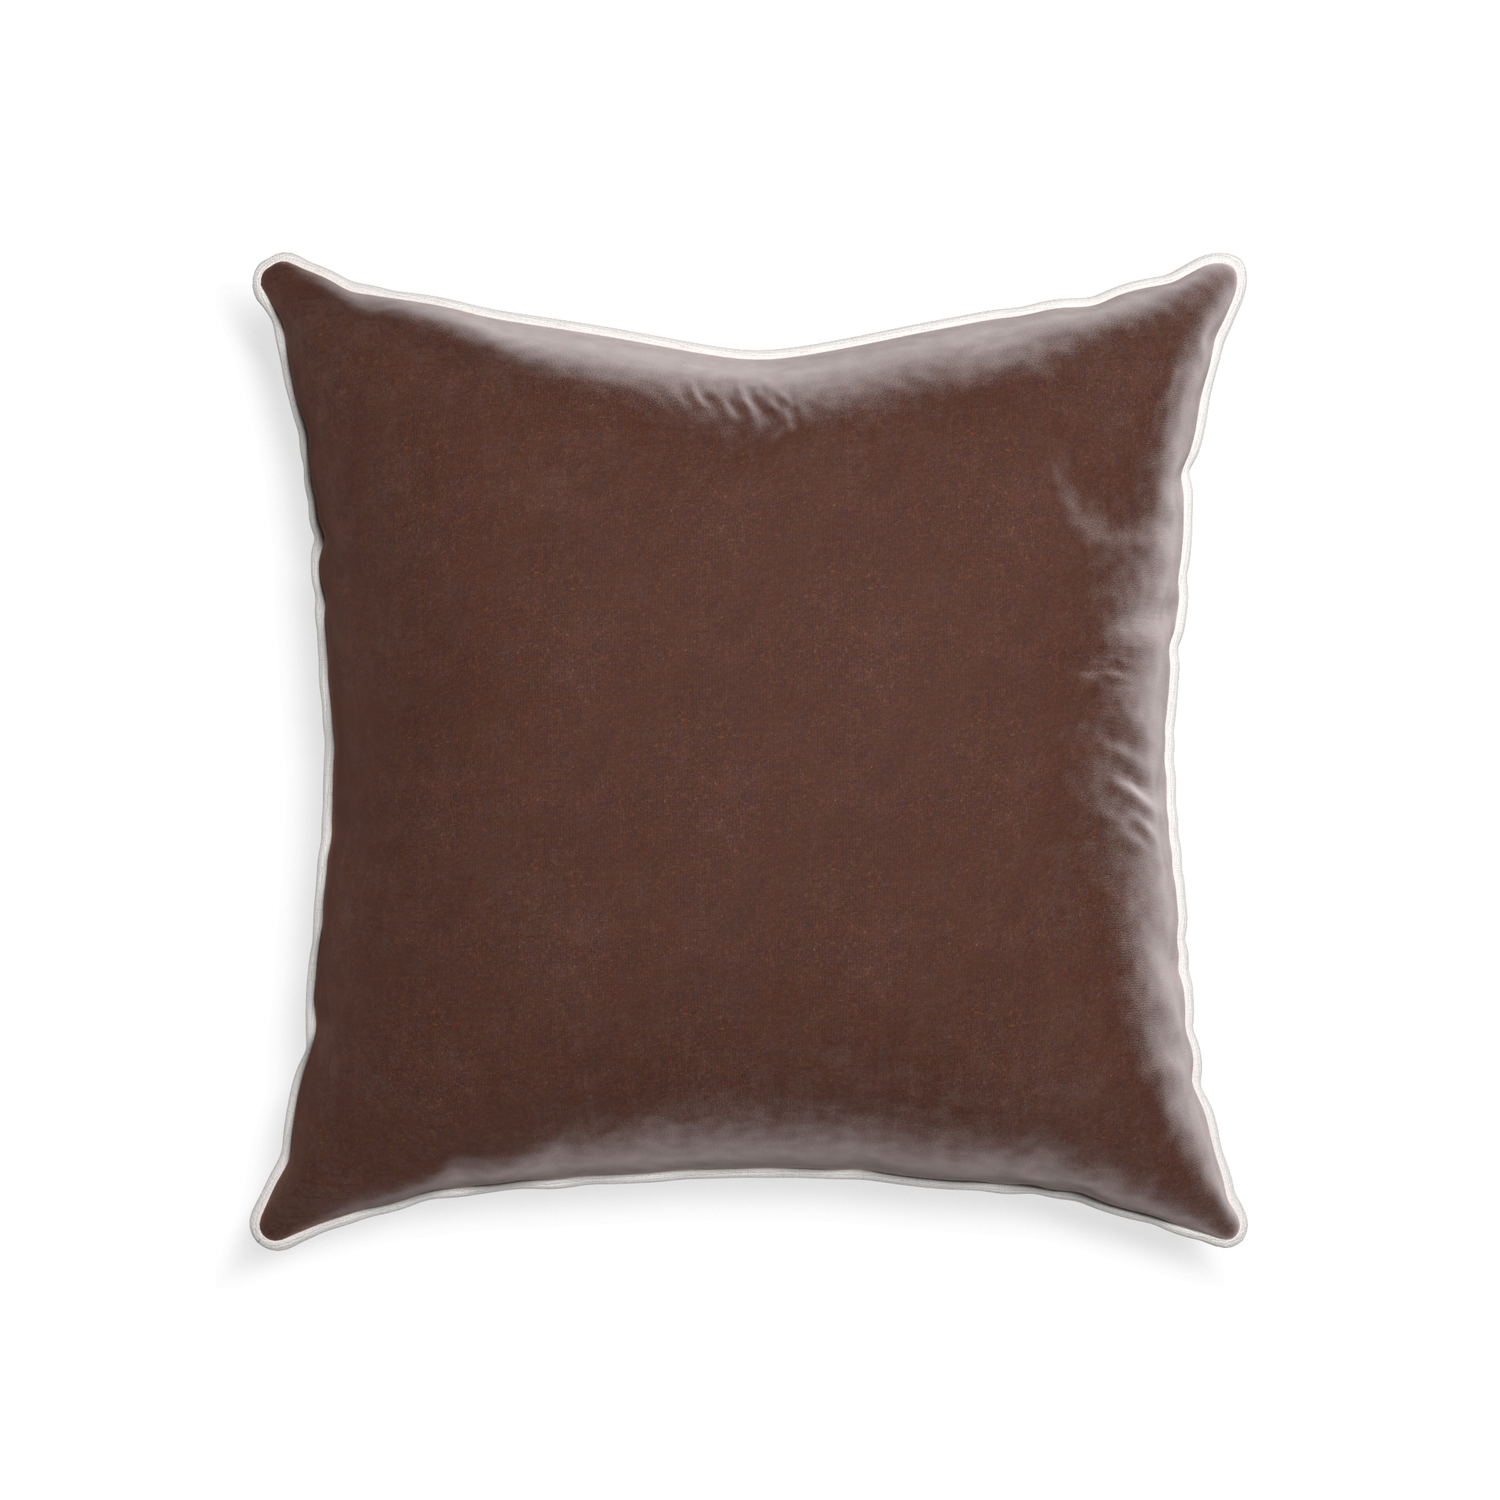 square brown velvet pillow with white piping